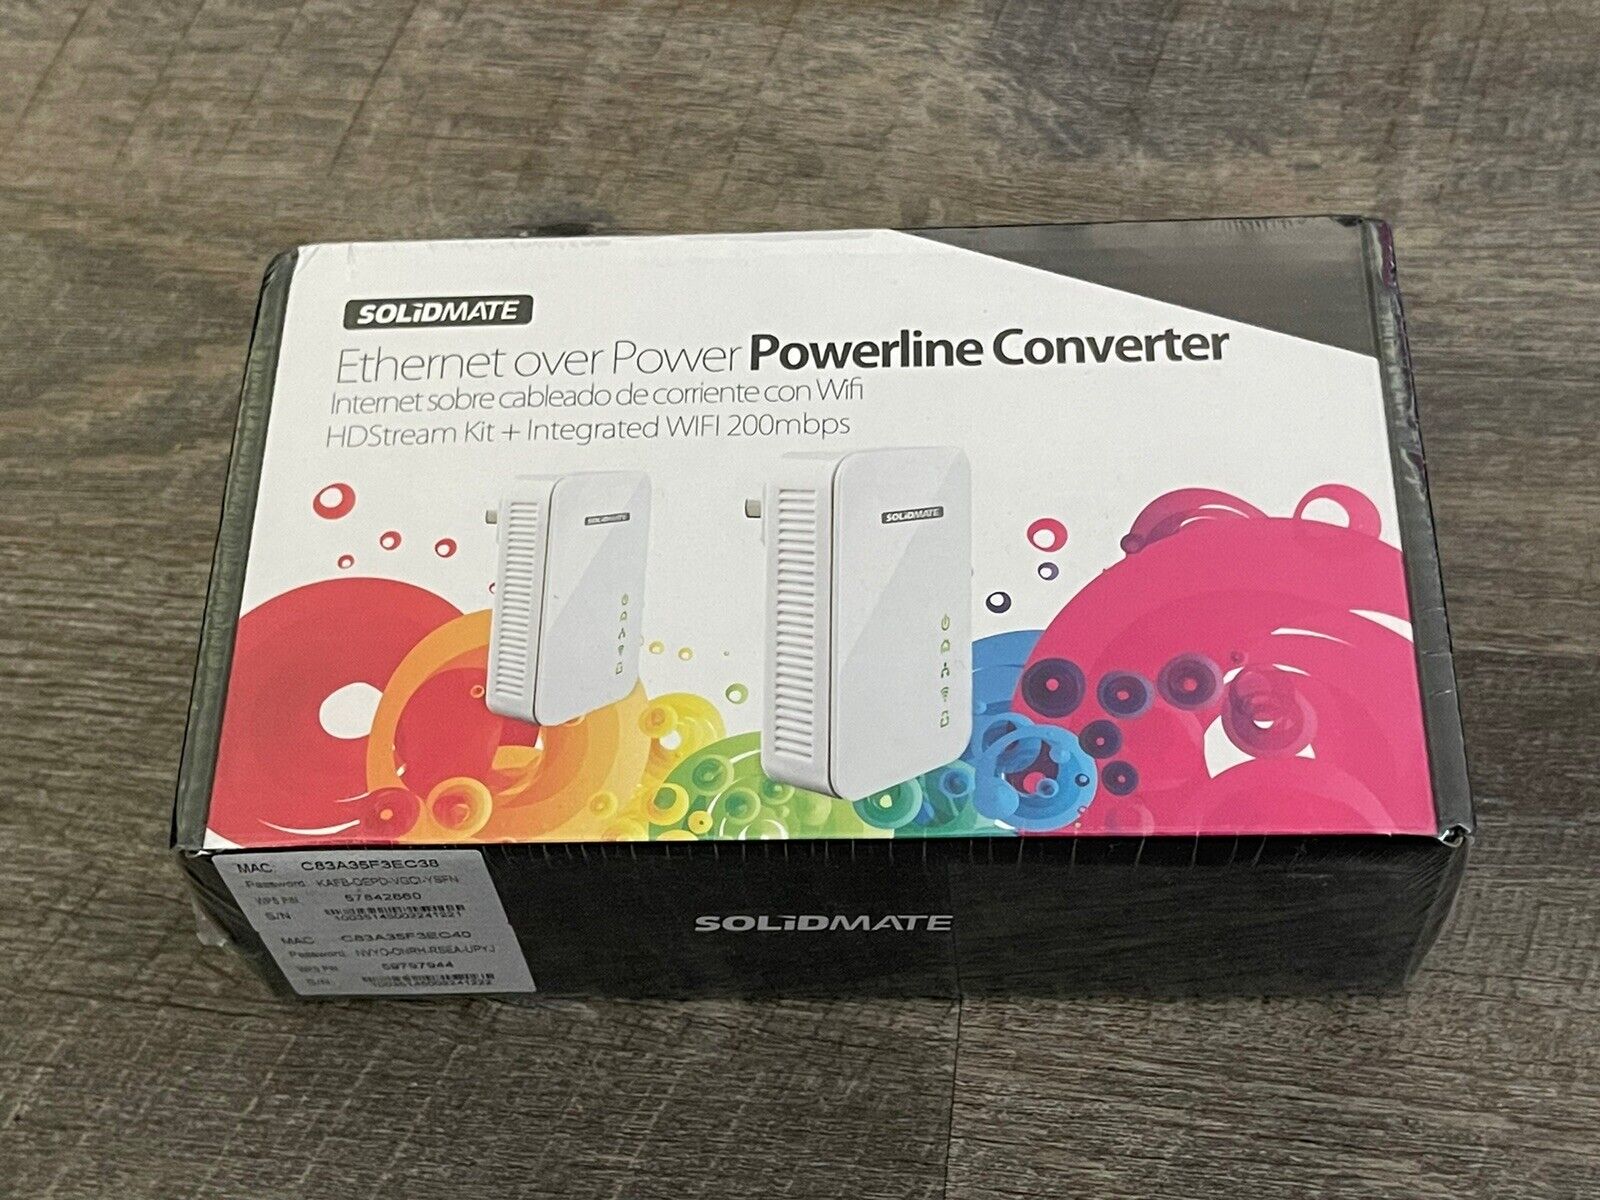 Solidmate Powerline Converter Ethernet Over Power Line (up to 200mbps) Brand New